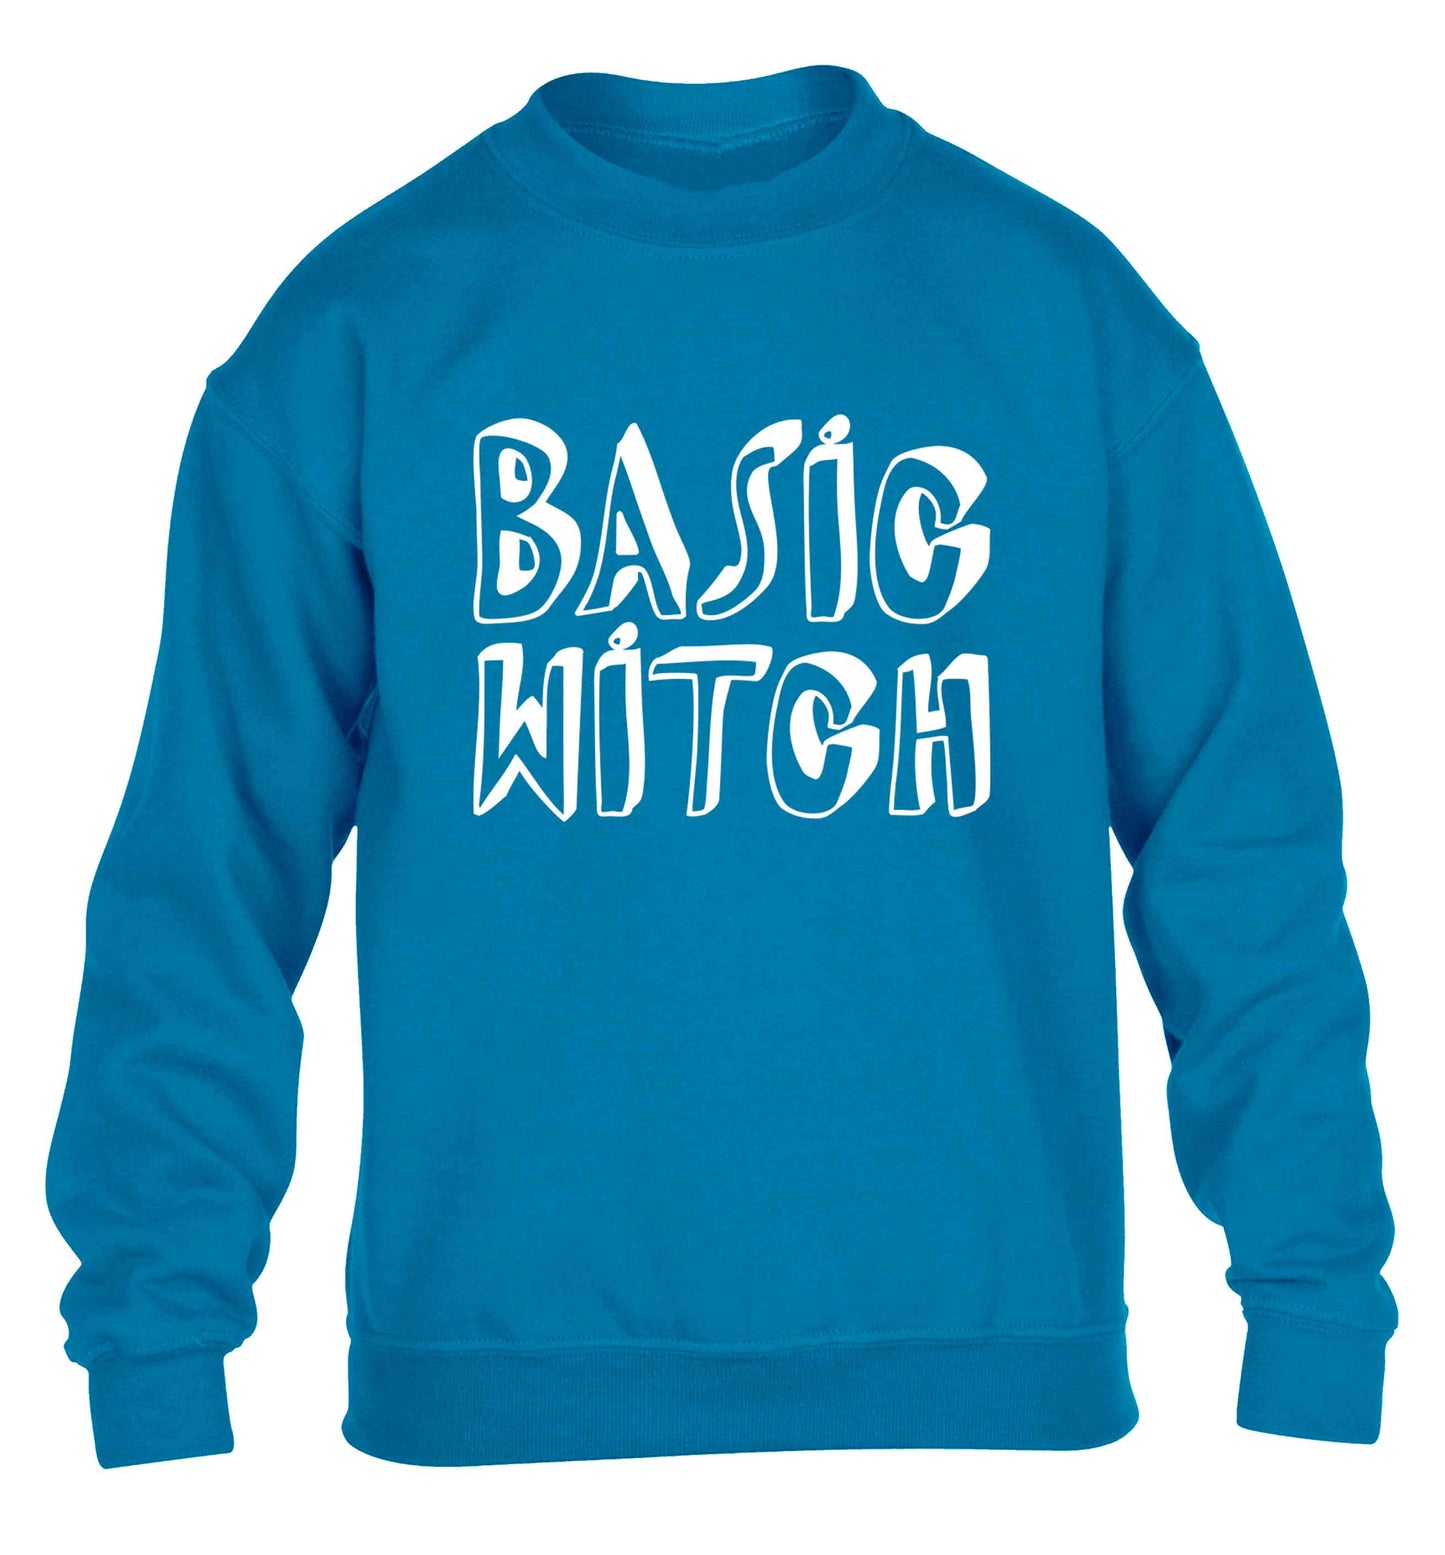 Basic witch children's blue sweater 12-13 Years